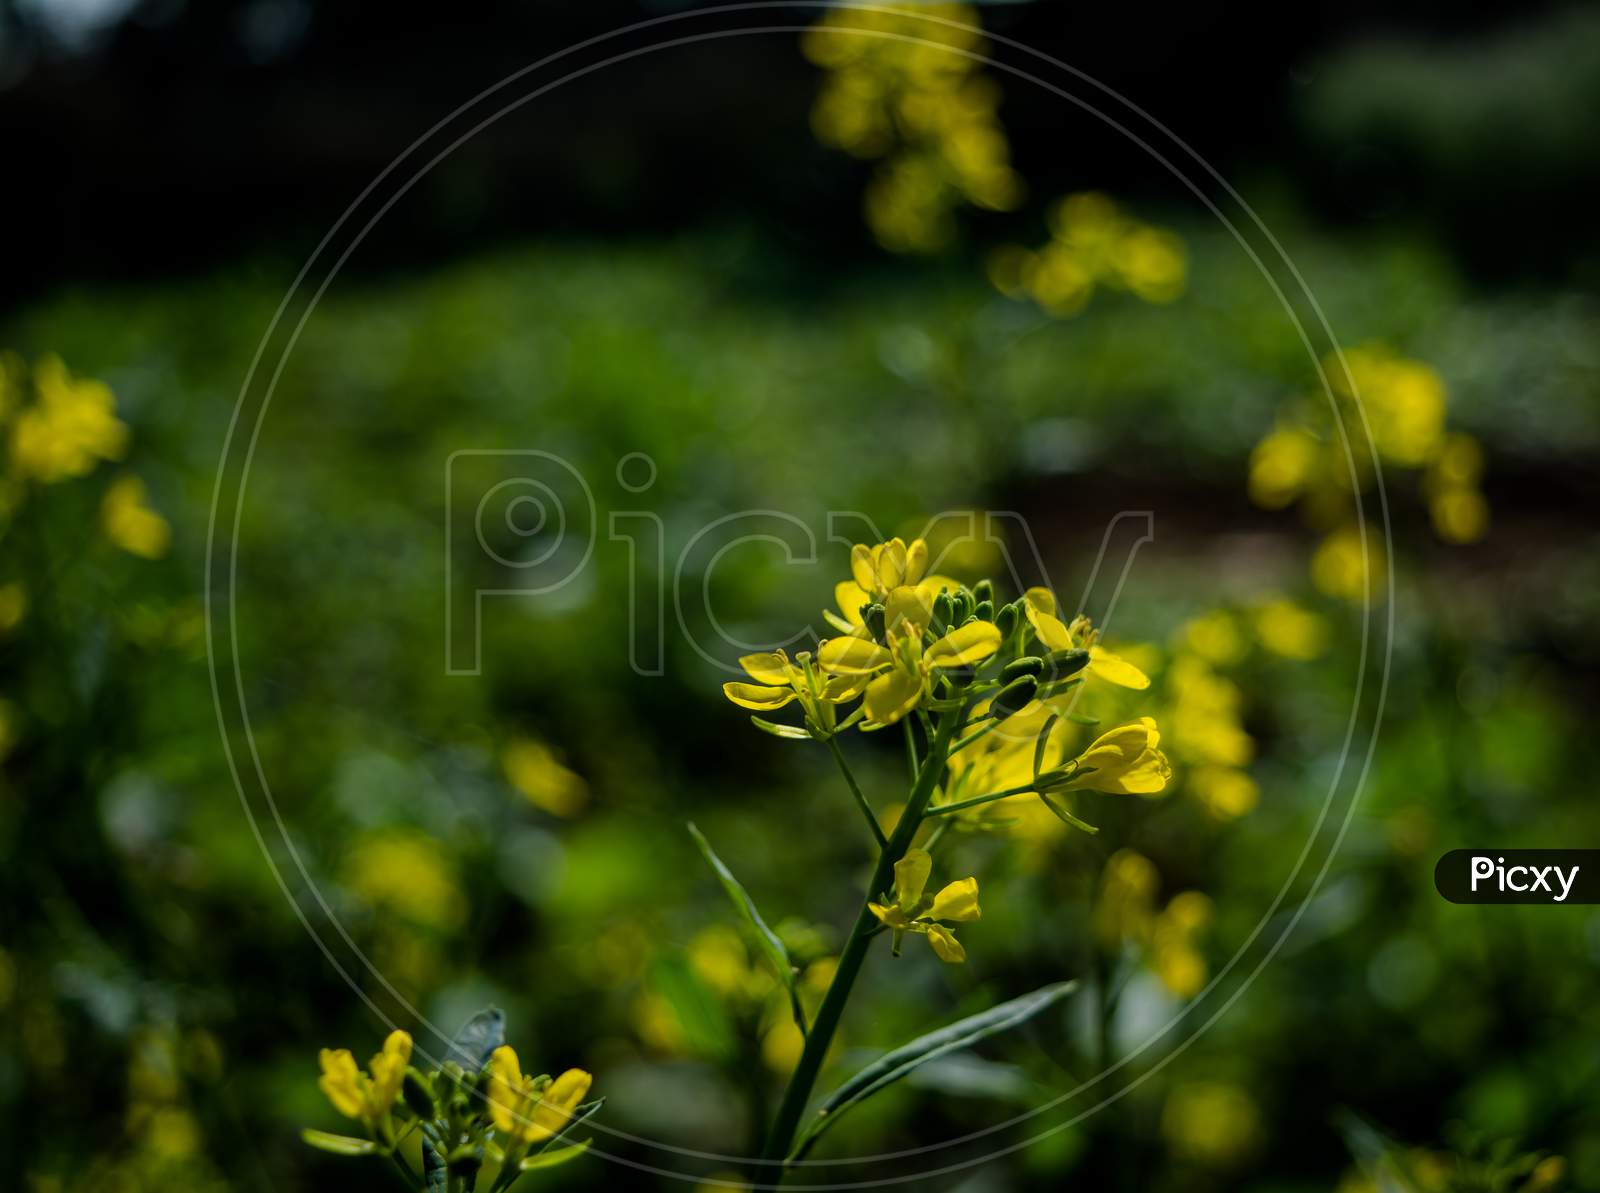 The Mustard Flower Or Plant Is A Plant Species In The Genera Brassica And Sinapis In The Family Brassicaceae.